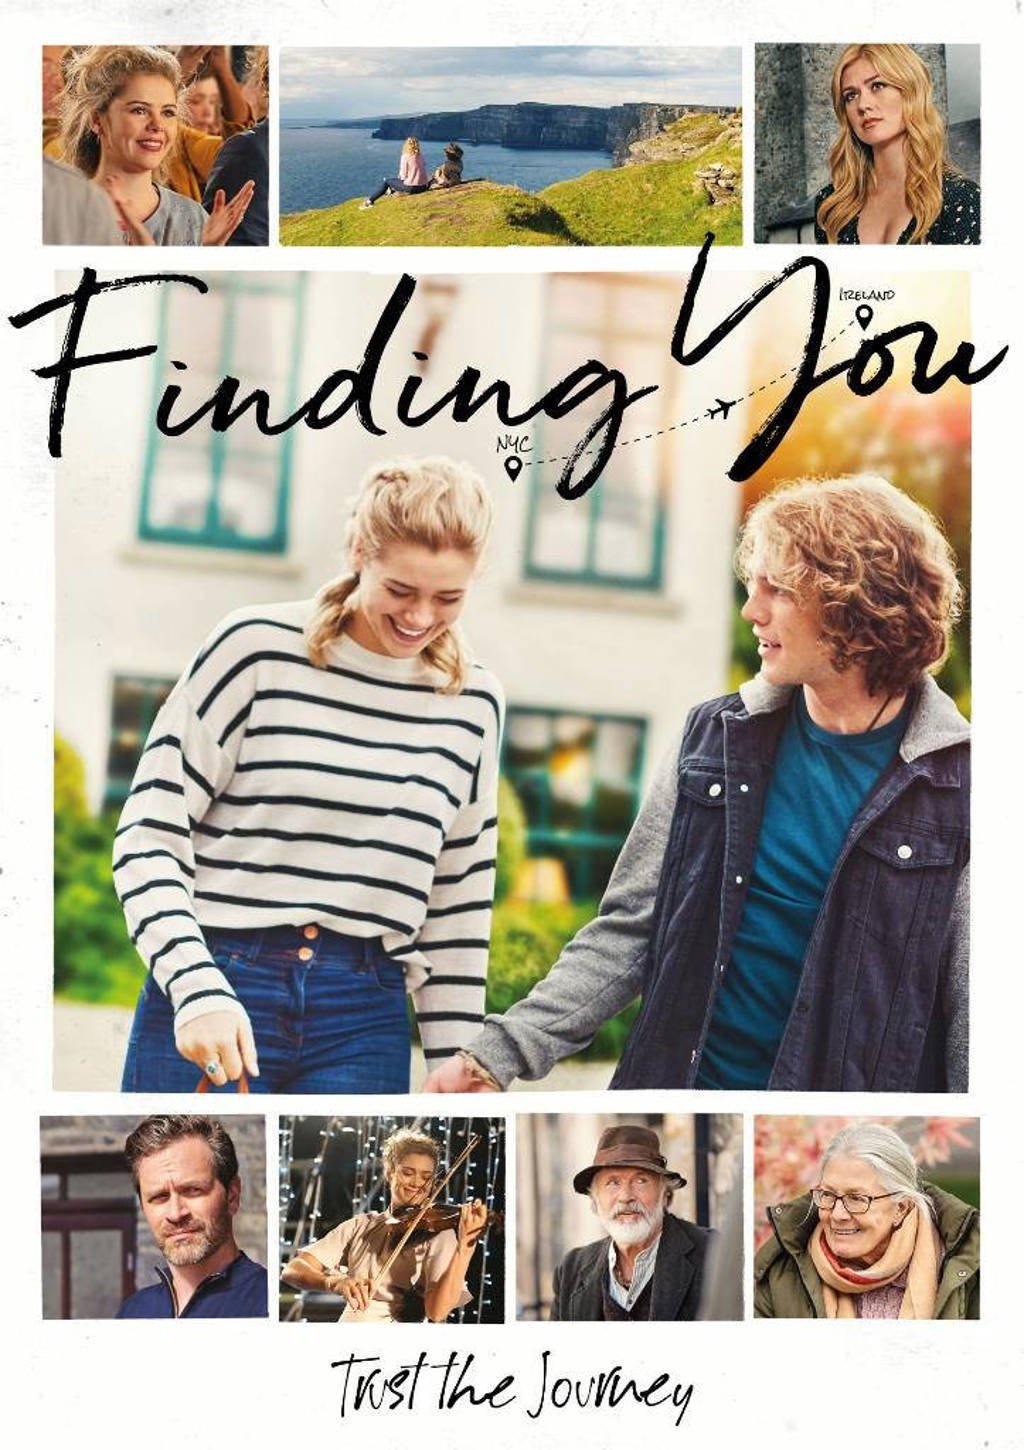 CD Shop - MOVIE FINDING YOU